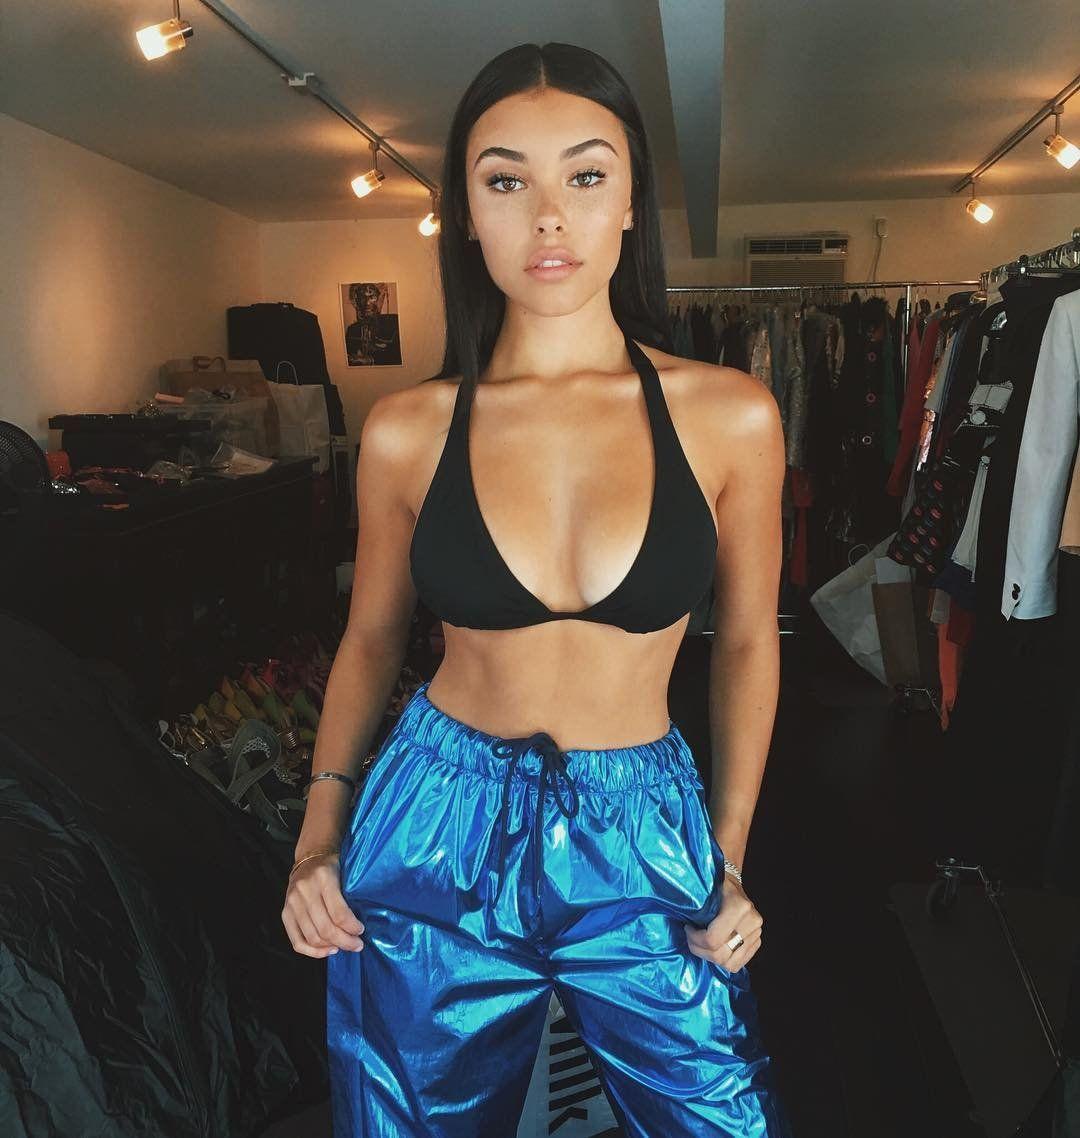 madison beer wallpaper  Maddison beer Beer wallpaper Madison beer outfits